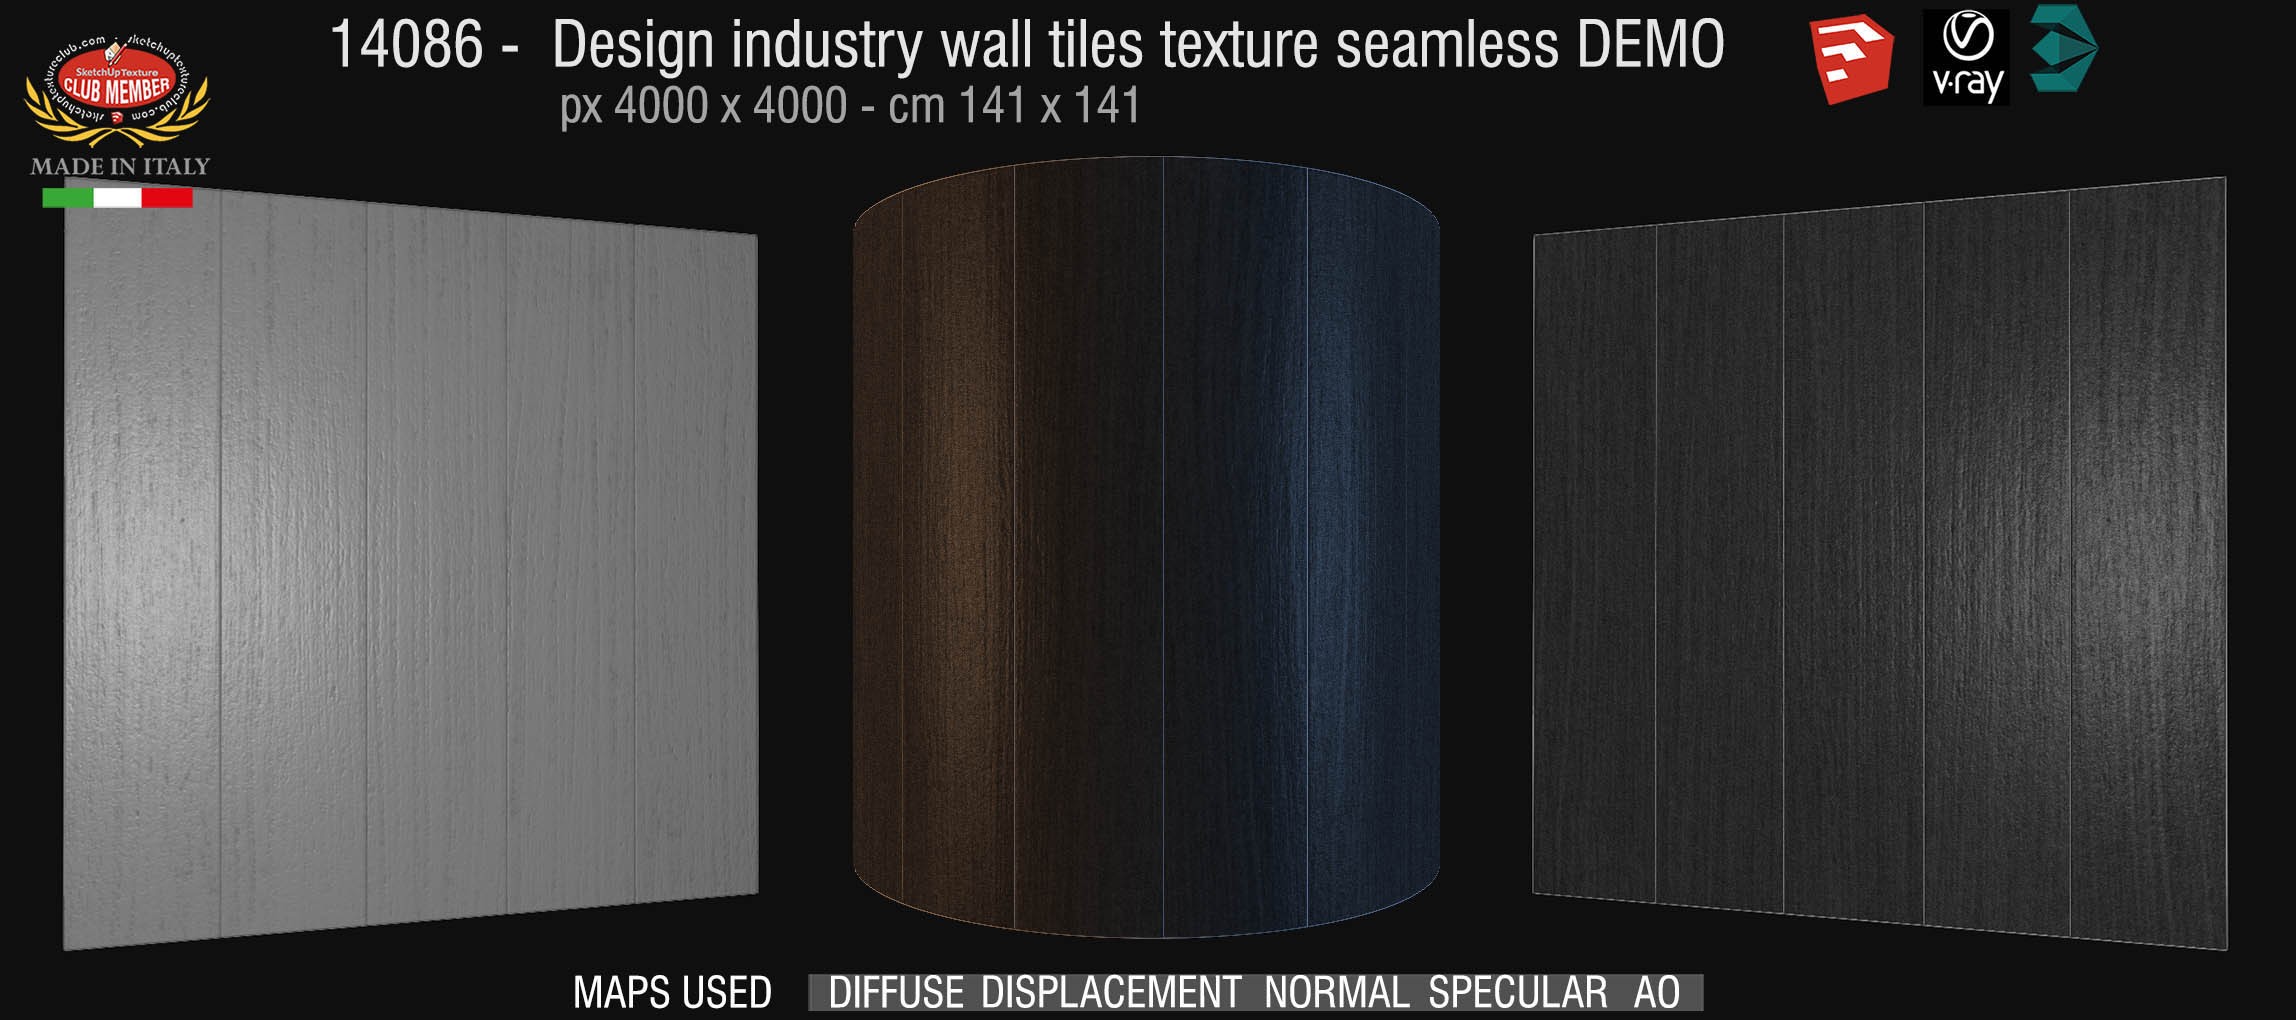 14086 Design industry wall tile texture seamless + maps DEMO